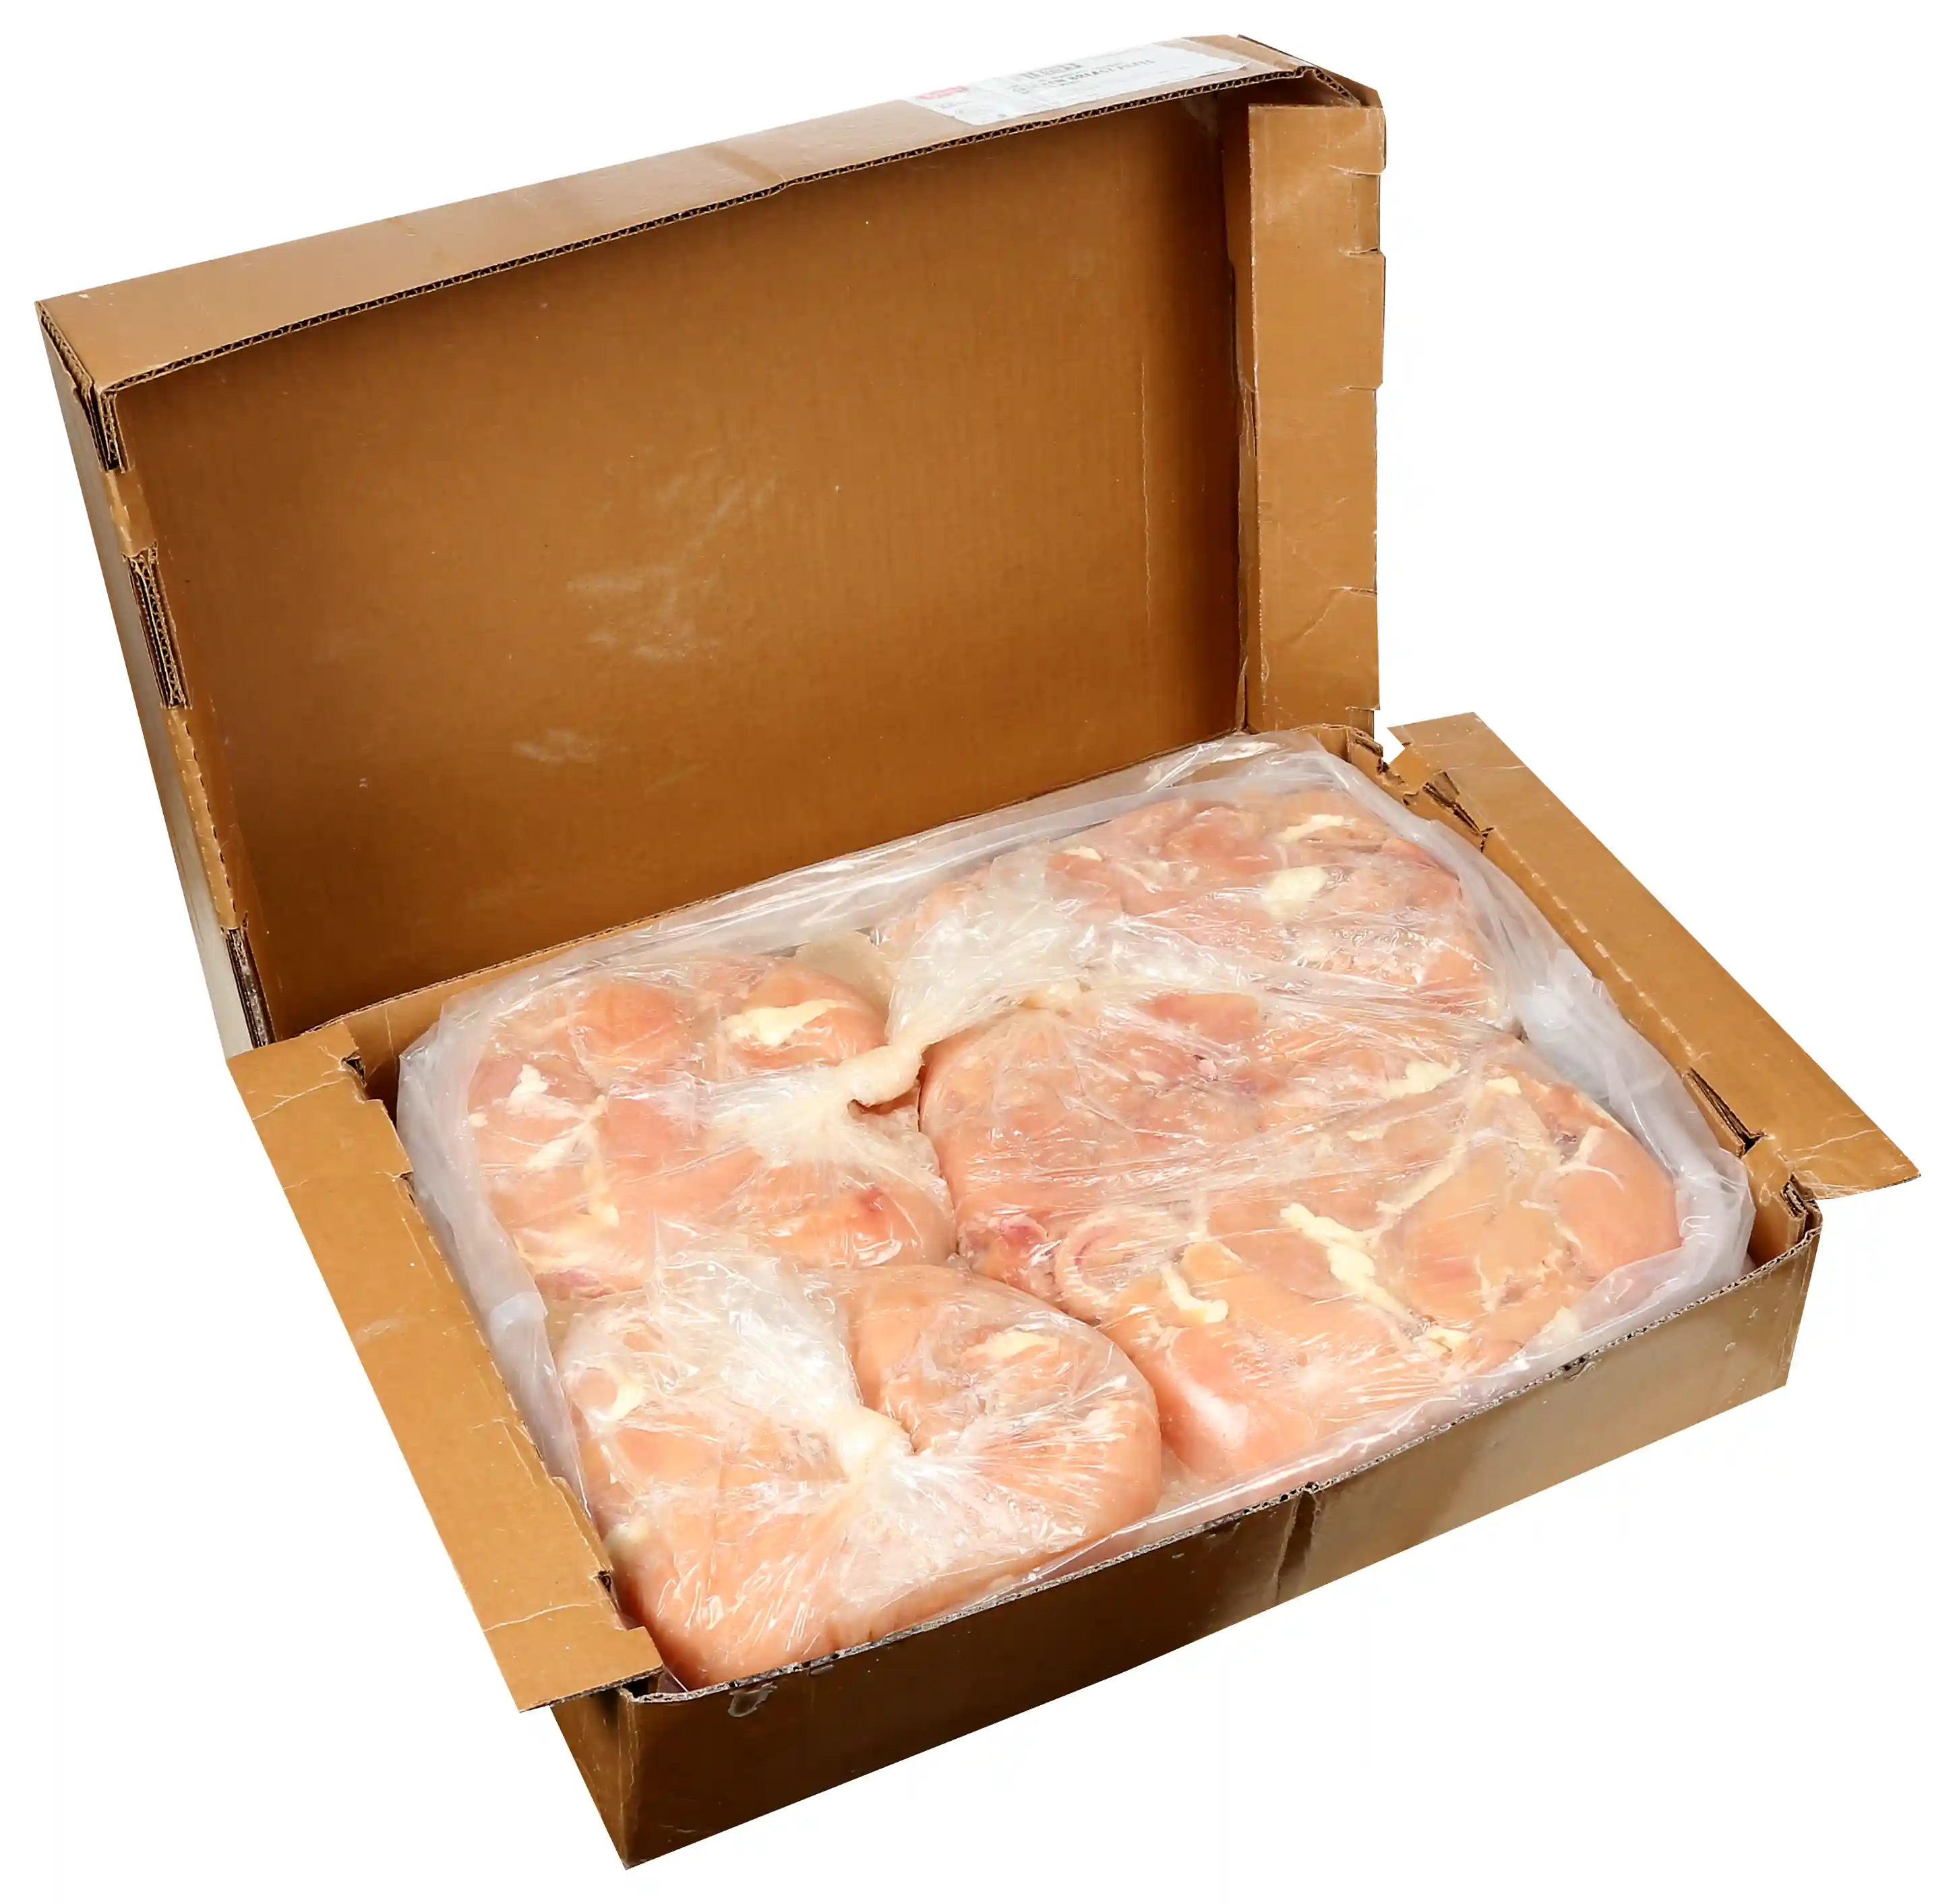 Tyson® All Natural* Uncooked Unbreaded Boneless Skinless Chicken Breast Filets, Random Weight_image_21